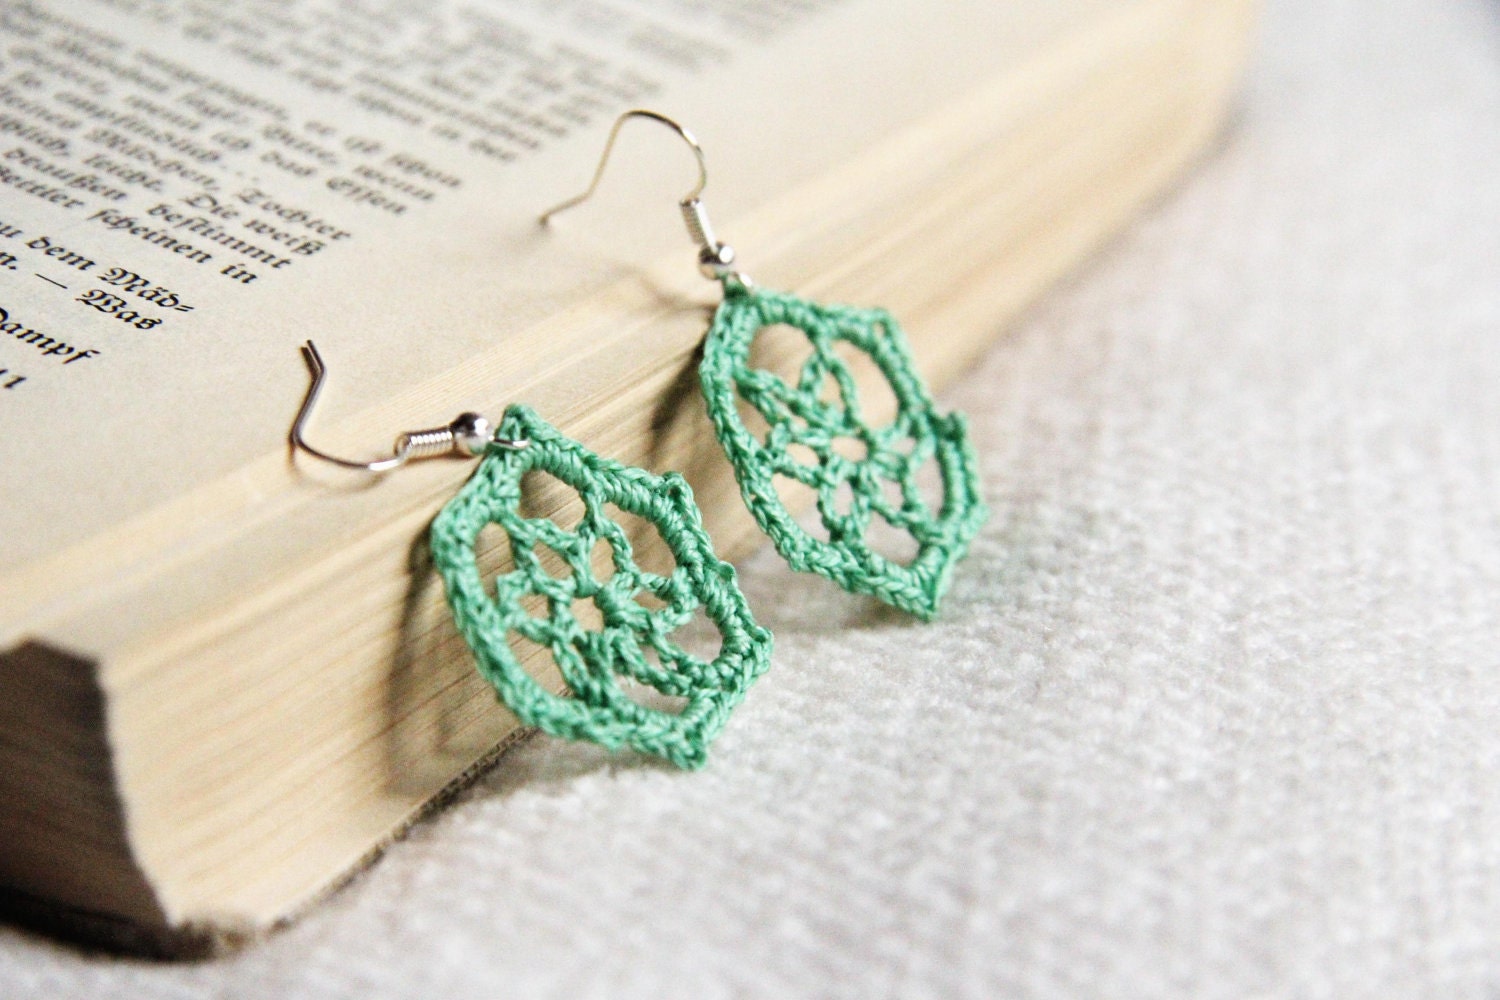 Moss green lace earrings - upcycled crocheted earrings - snowflakes earrings - FREE SHIPPING